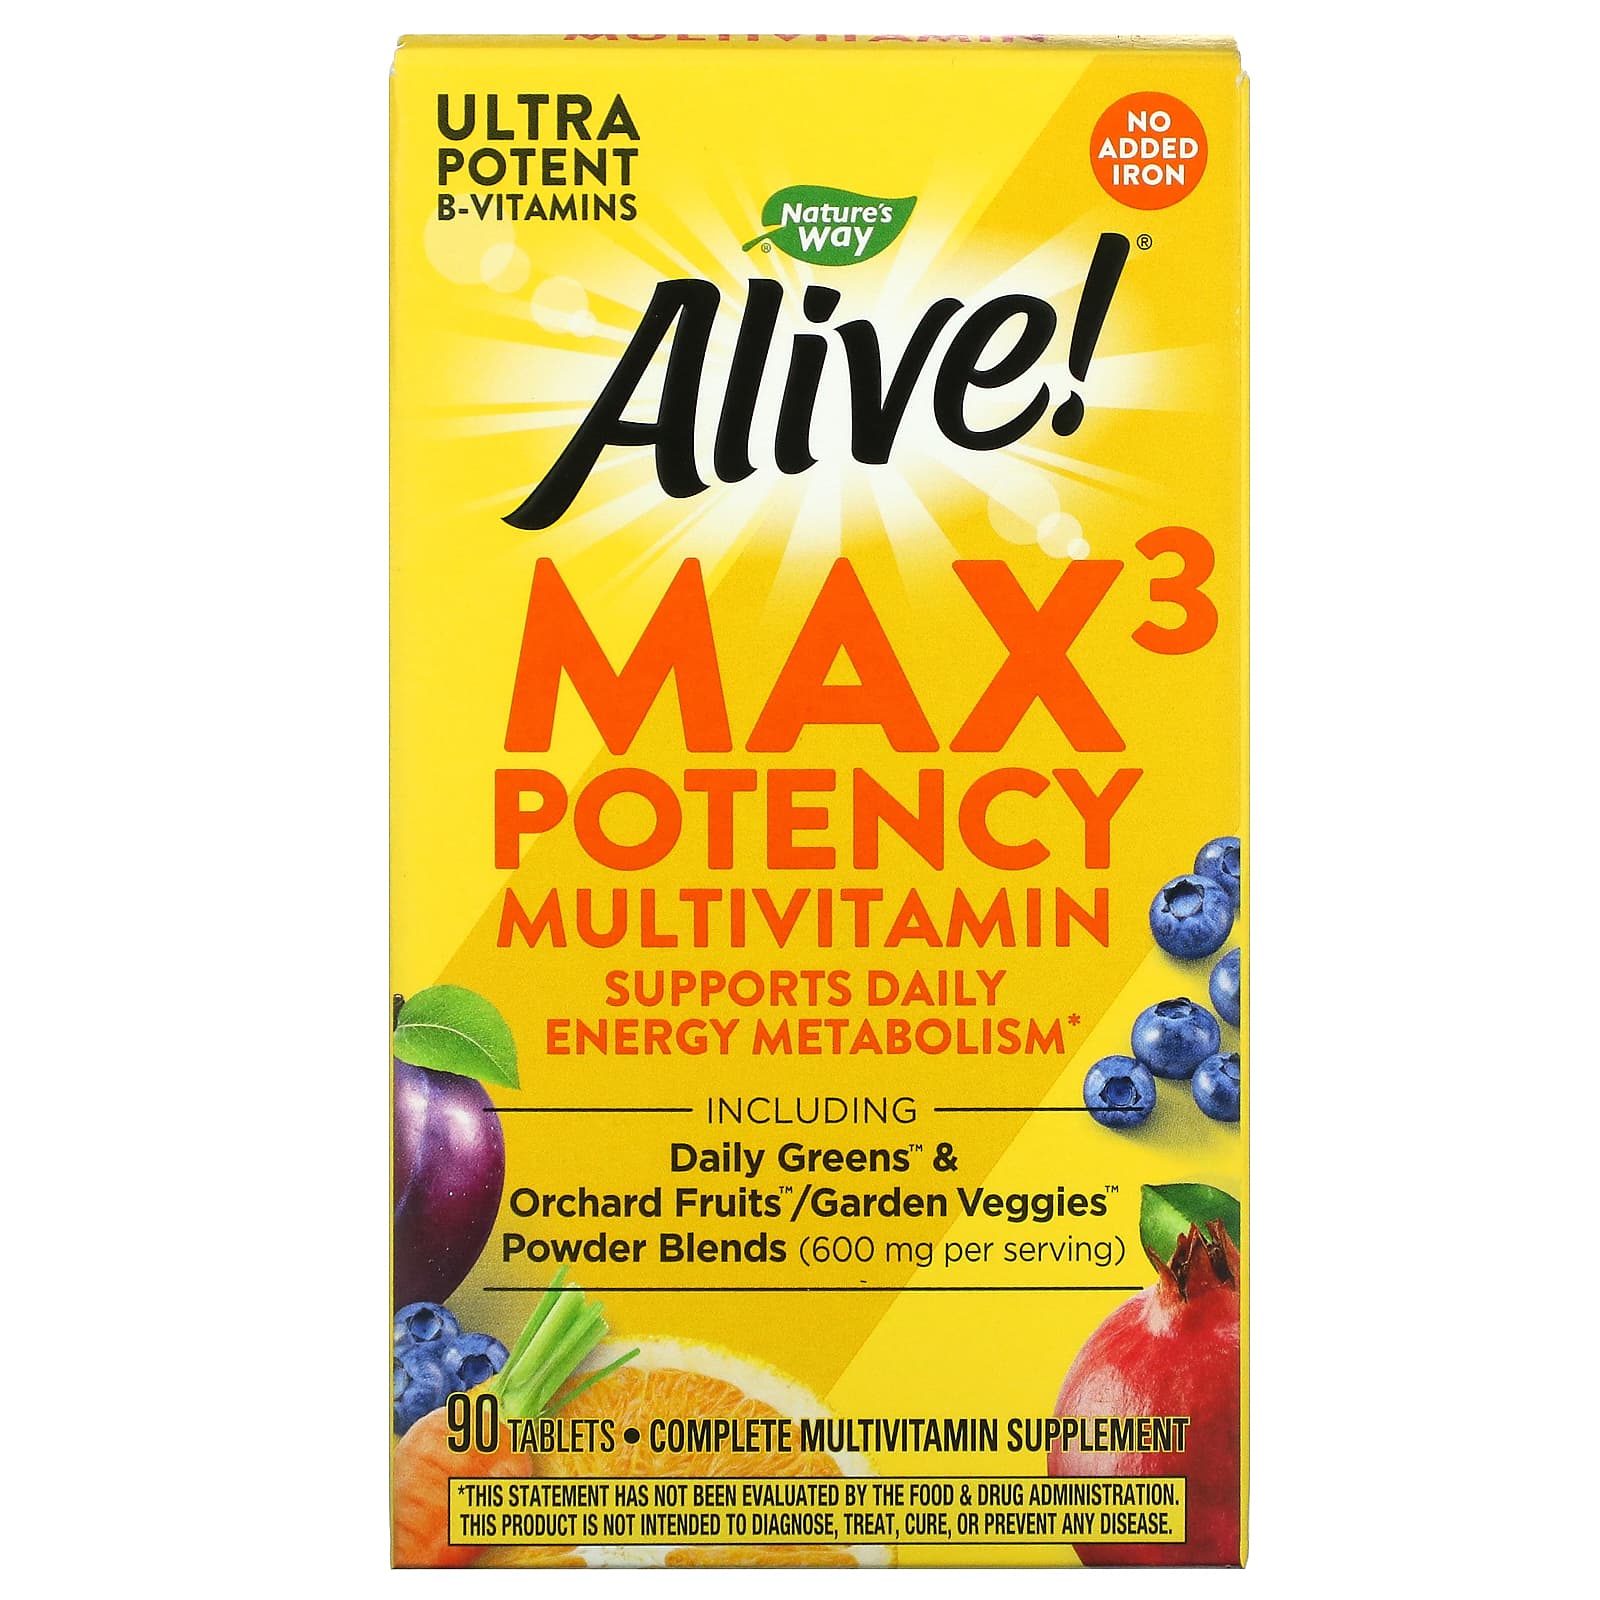 Nature's Way-Alive! Max3 Potency Multivitamin-No Added Iron-90 Tablets